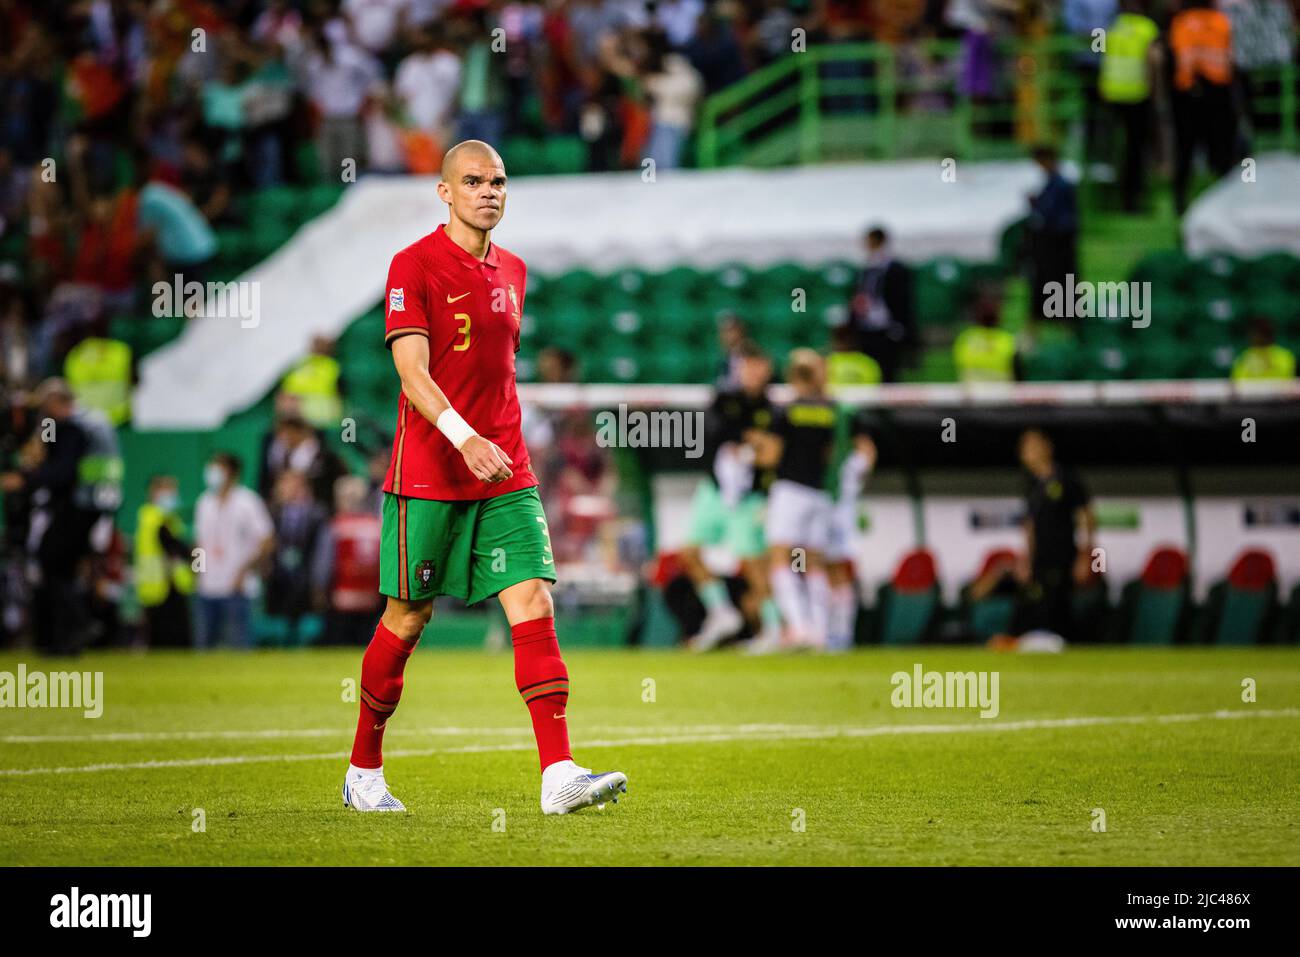 Lisbon, Portugal. 09th June, 2022. Kepler Laveran de Lima Ferreira known as Pepe of Portugal seen in action during the UEFA Nations League, League A group 2 match between Portugal and Czech Republic at the Jose Alvalade stadium. (Final score; Portugal 2:0 Czech Republic) Credit: SOPA Images Limited/Alamy Live News Stock Photo